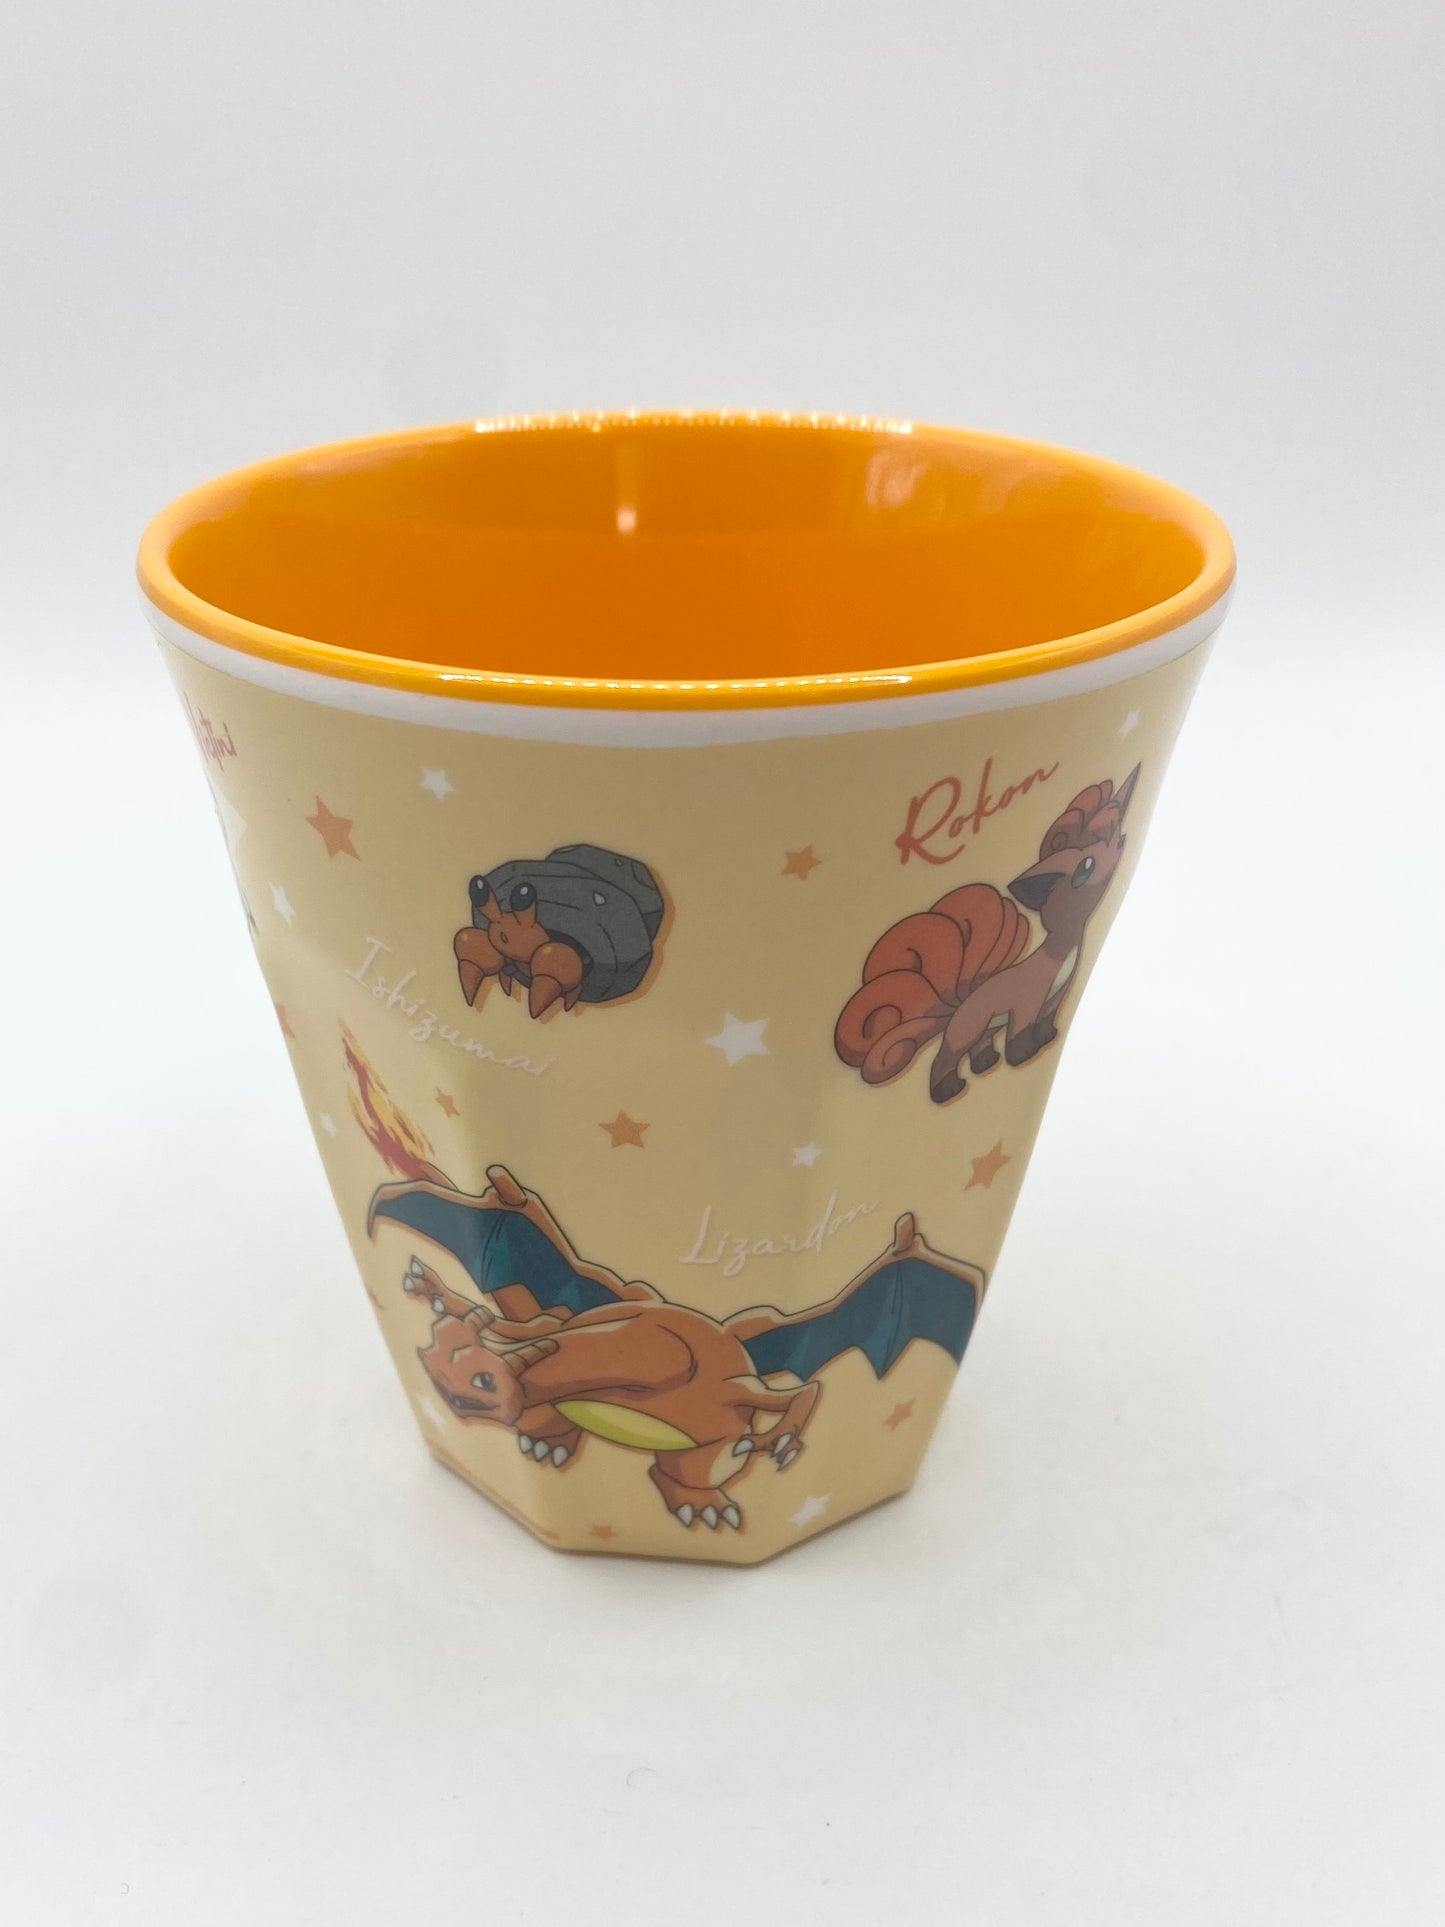 Pokemon Pocket Monsters Japanese Small Cup